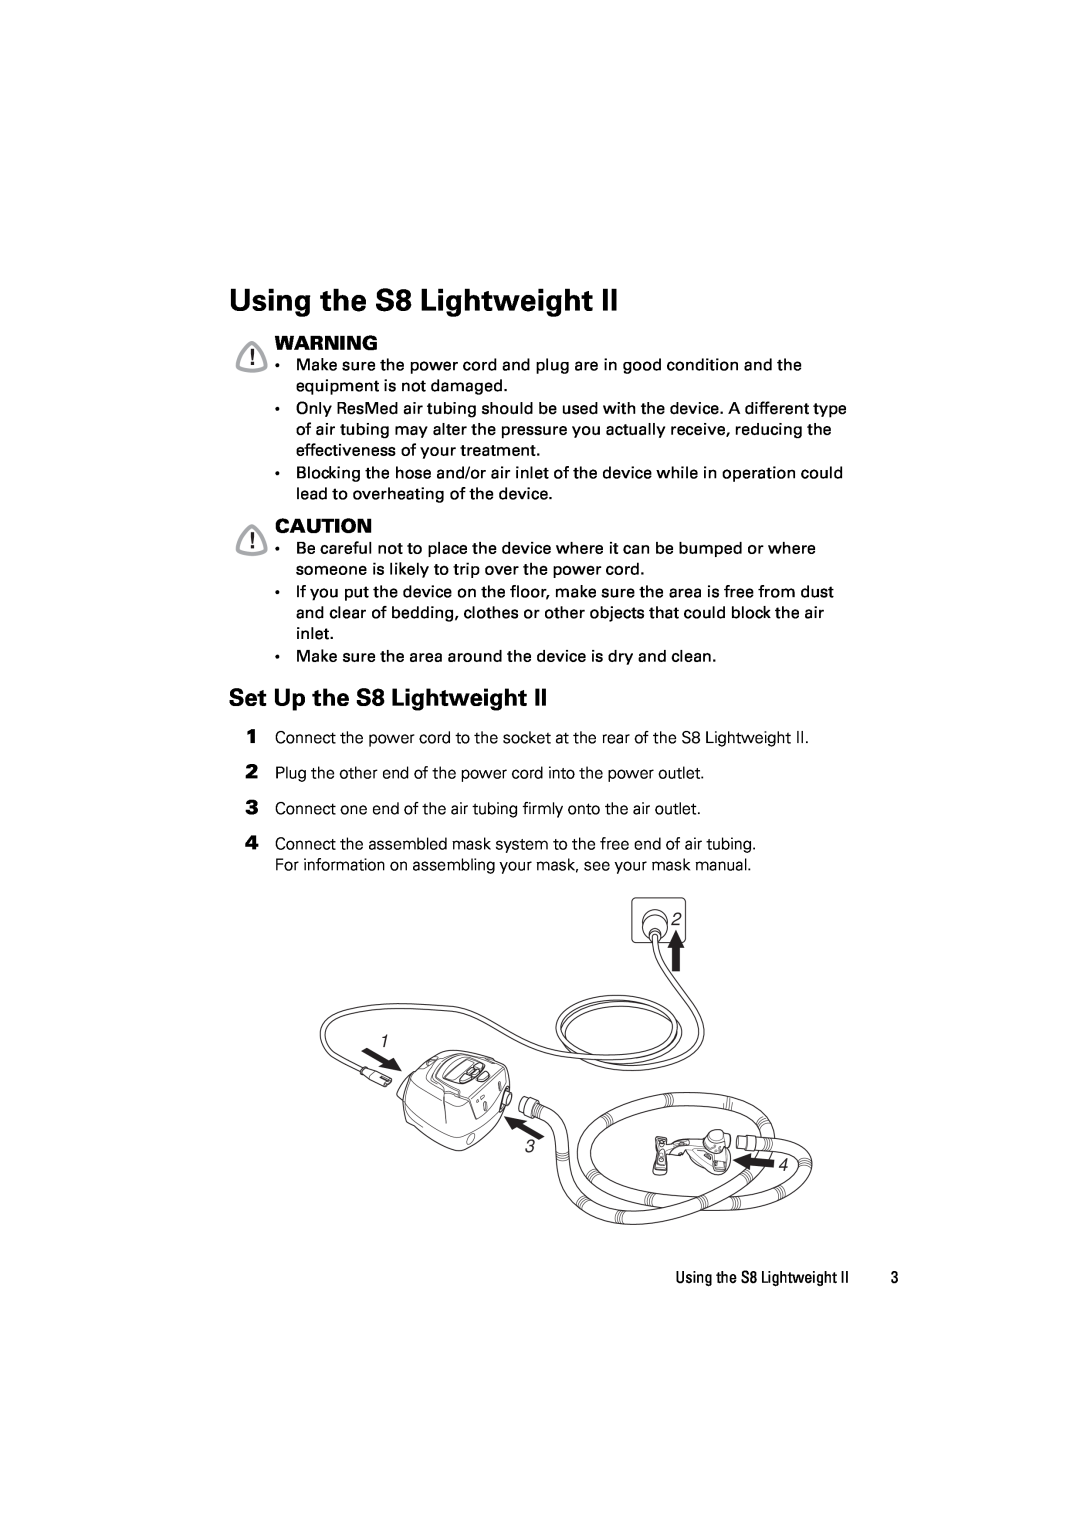 ResMed s8 manual Using the S8 Lightweight, Set Up the S8 Lightweight 